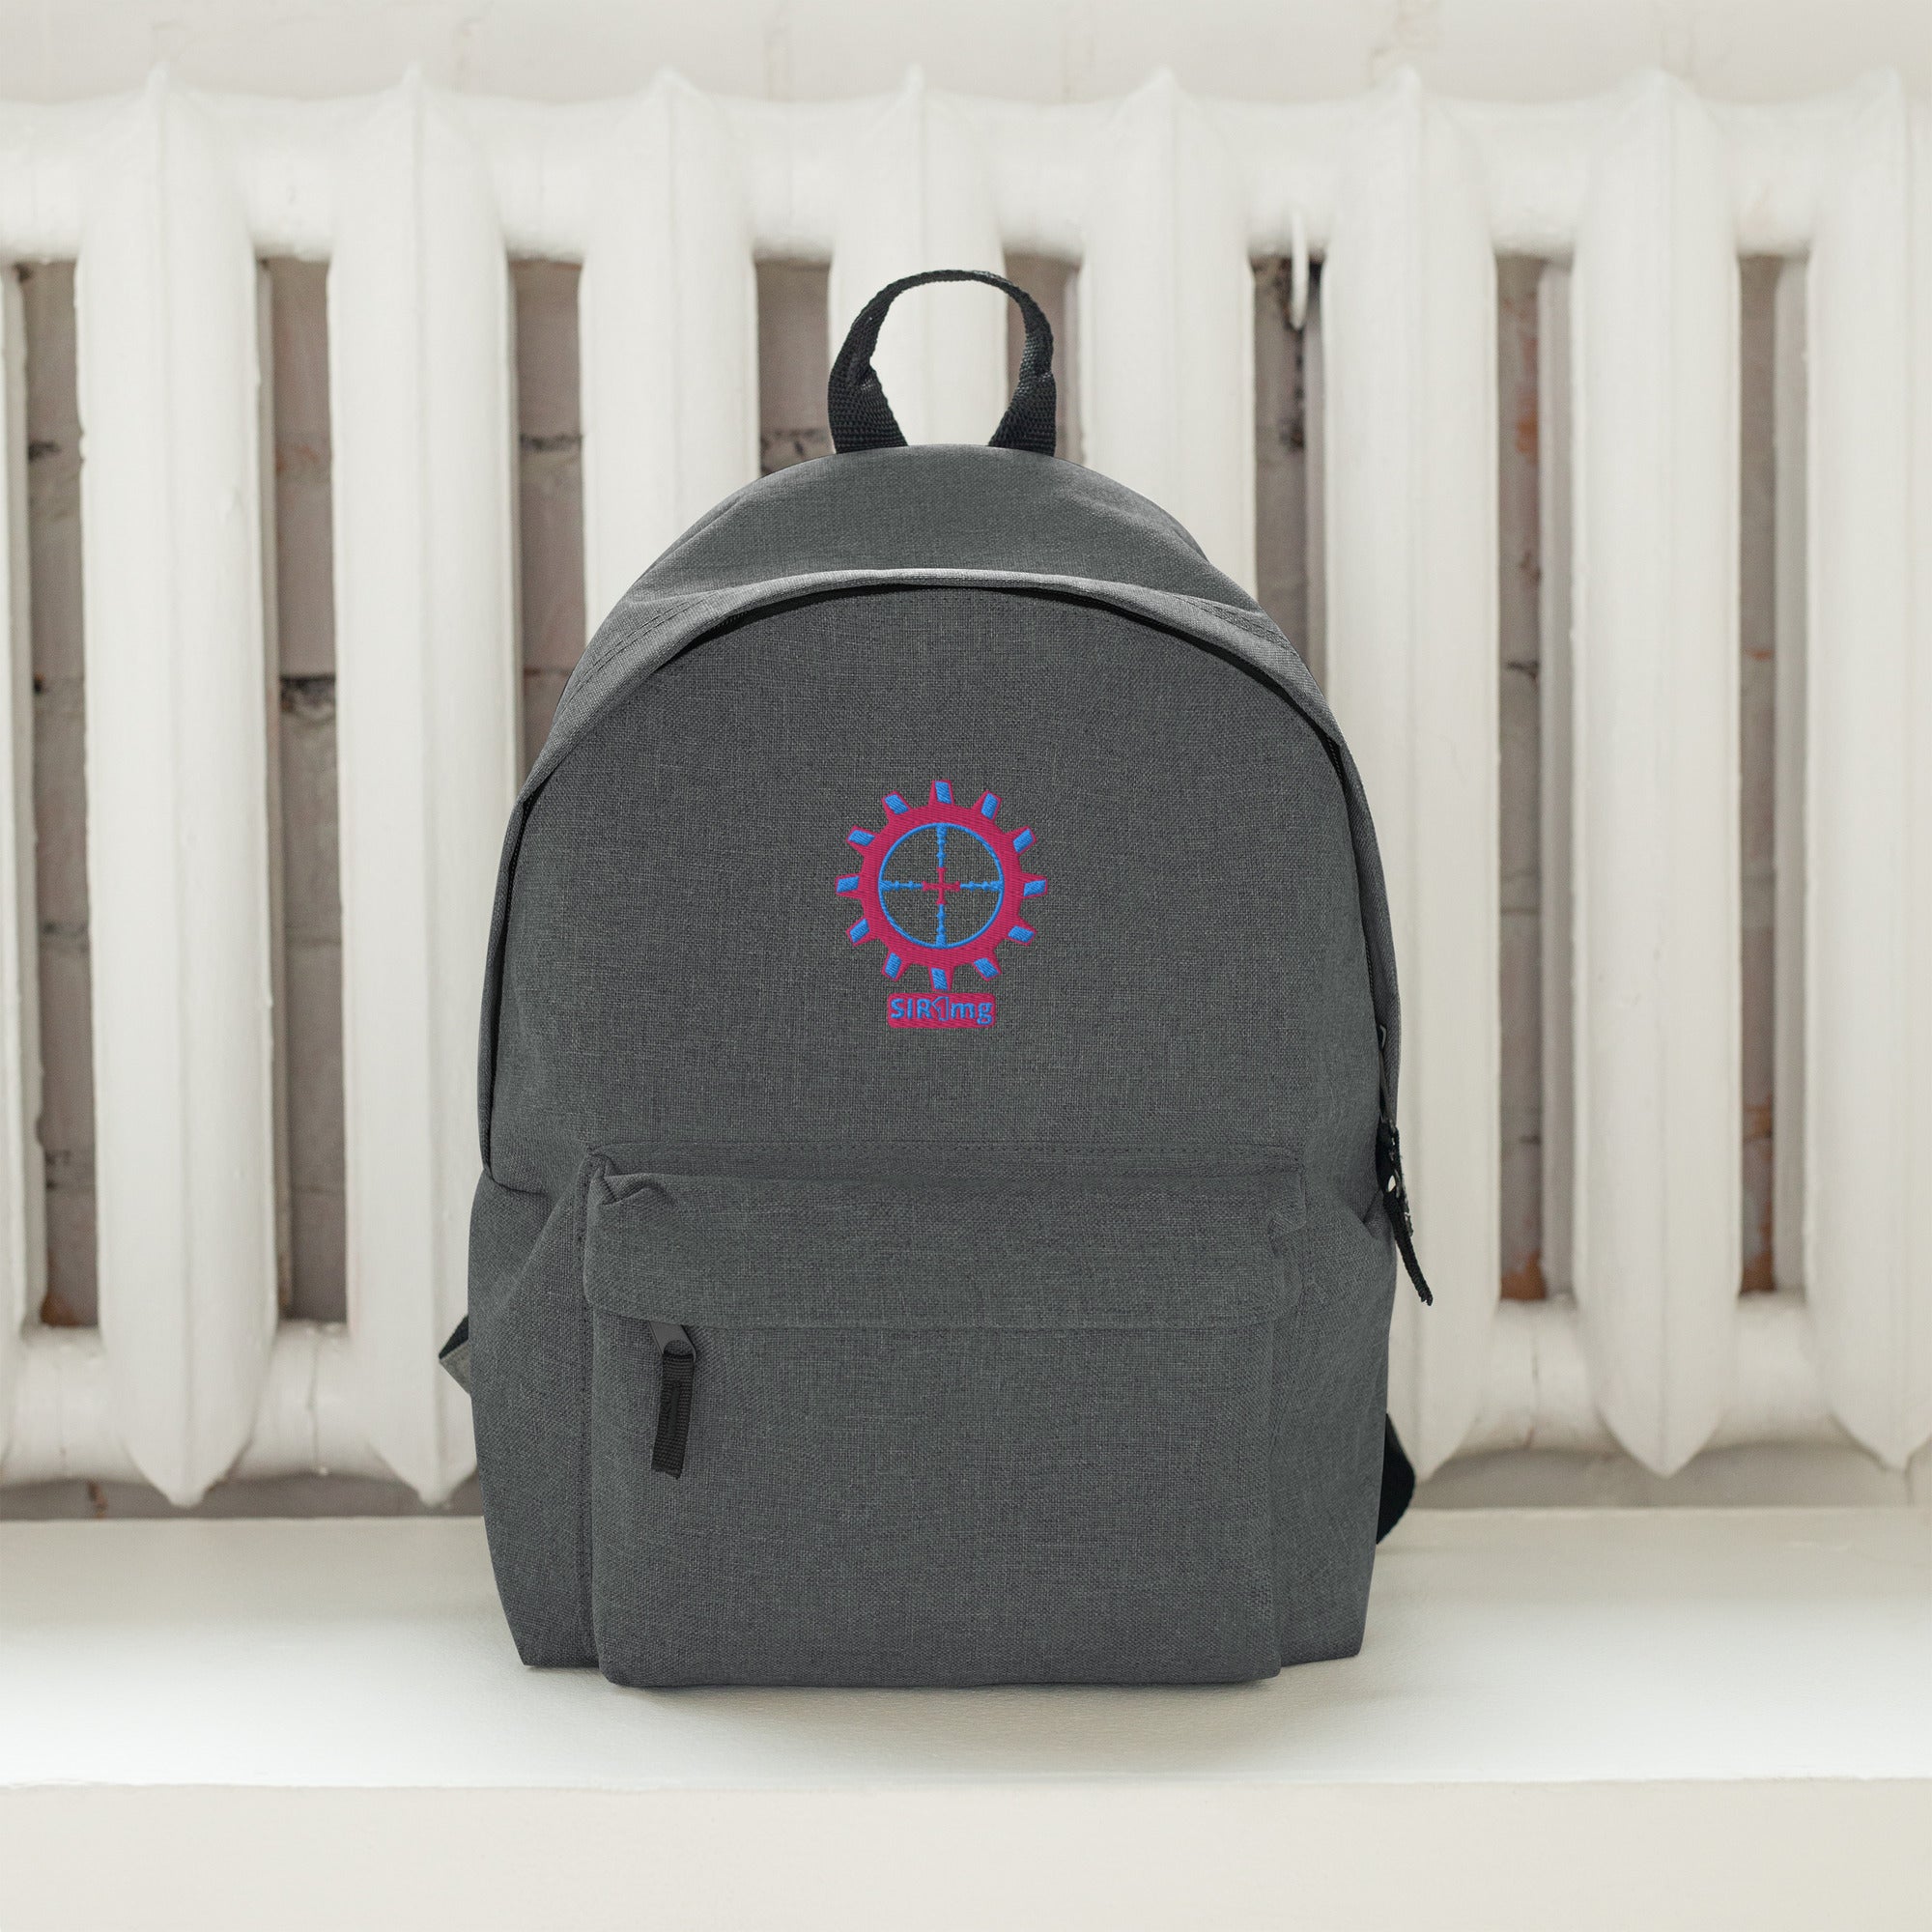 SIR1mg Embroidered Backpack